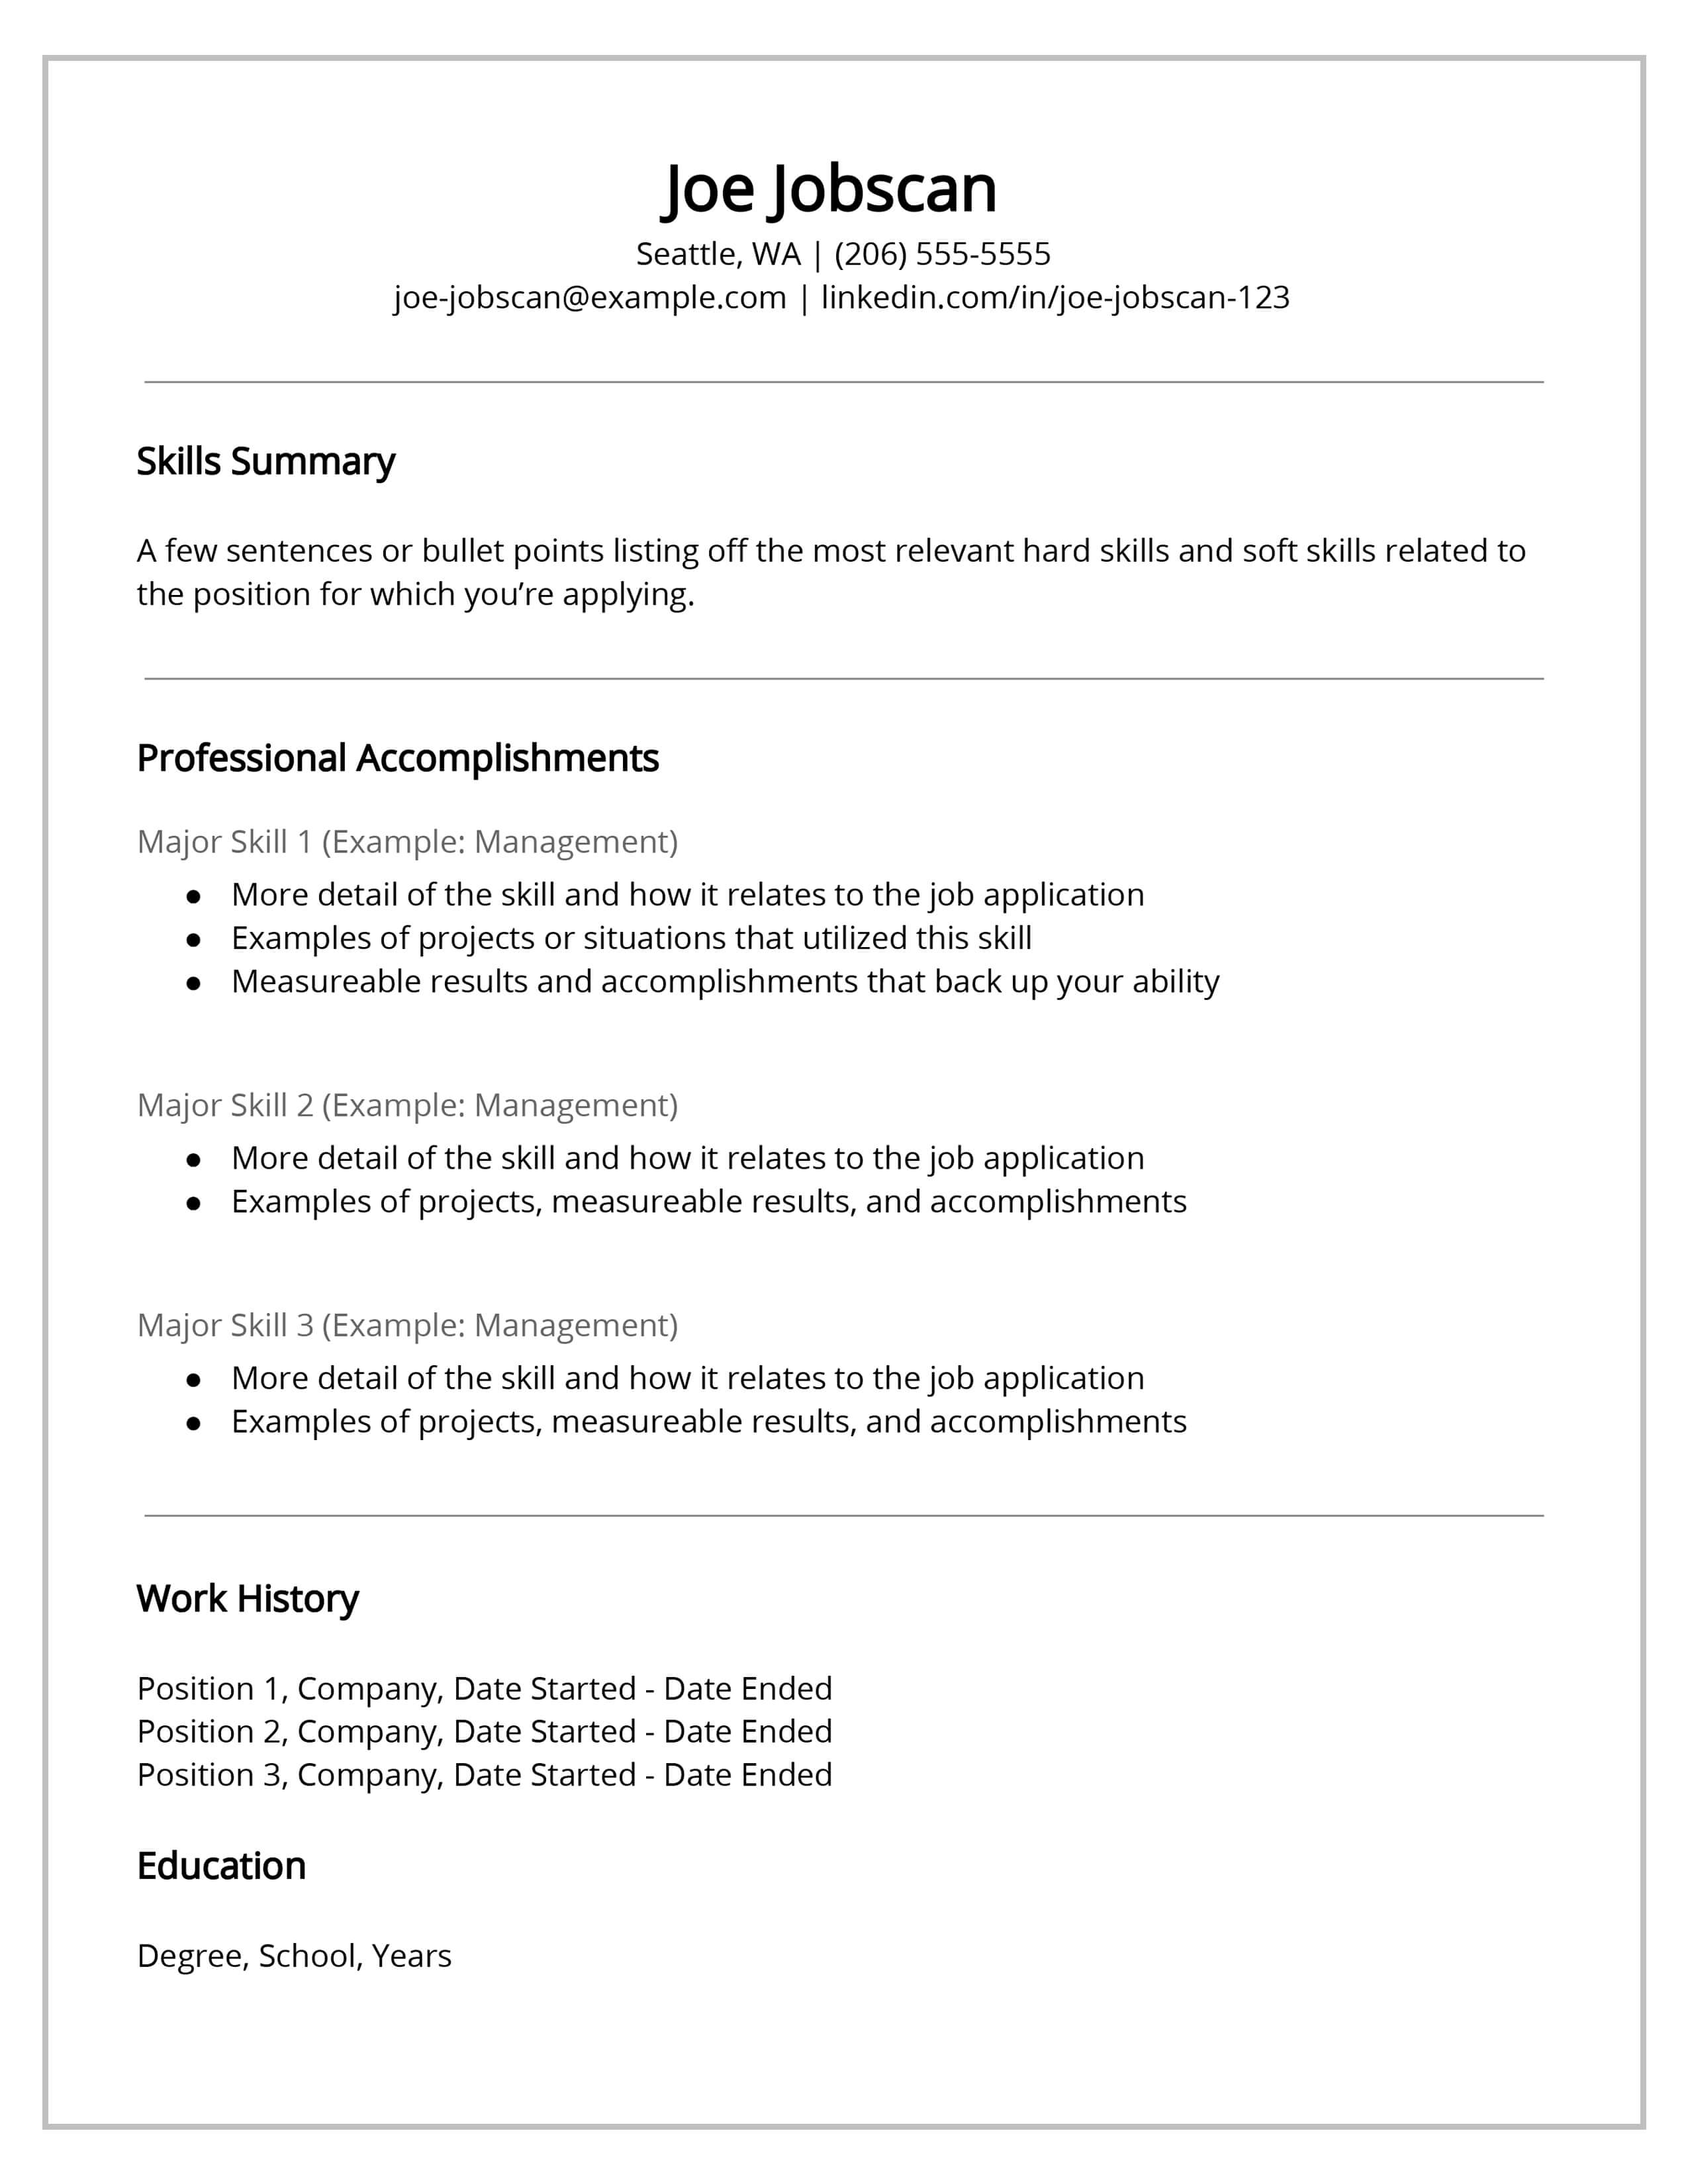 resume template download